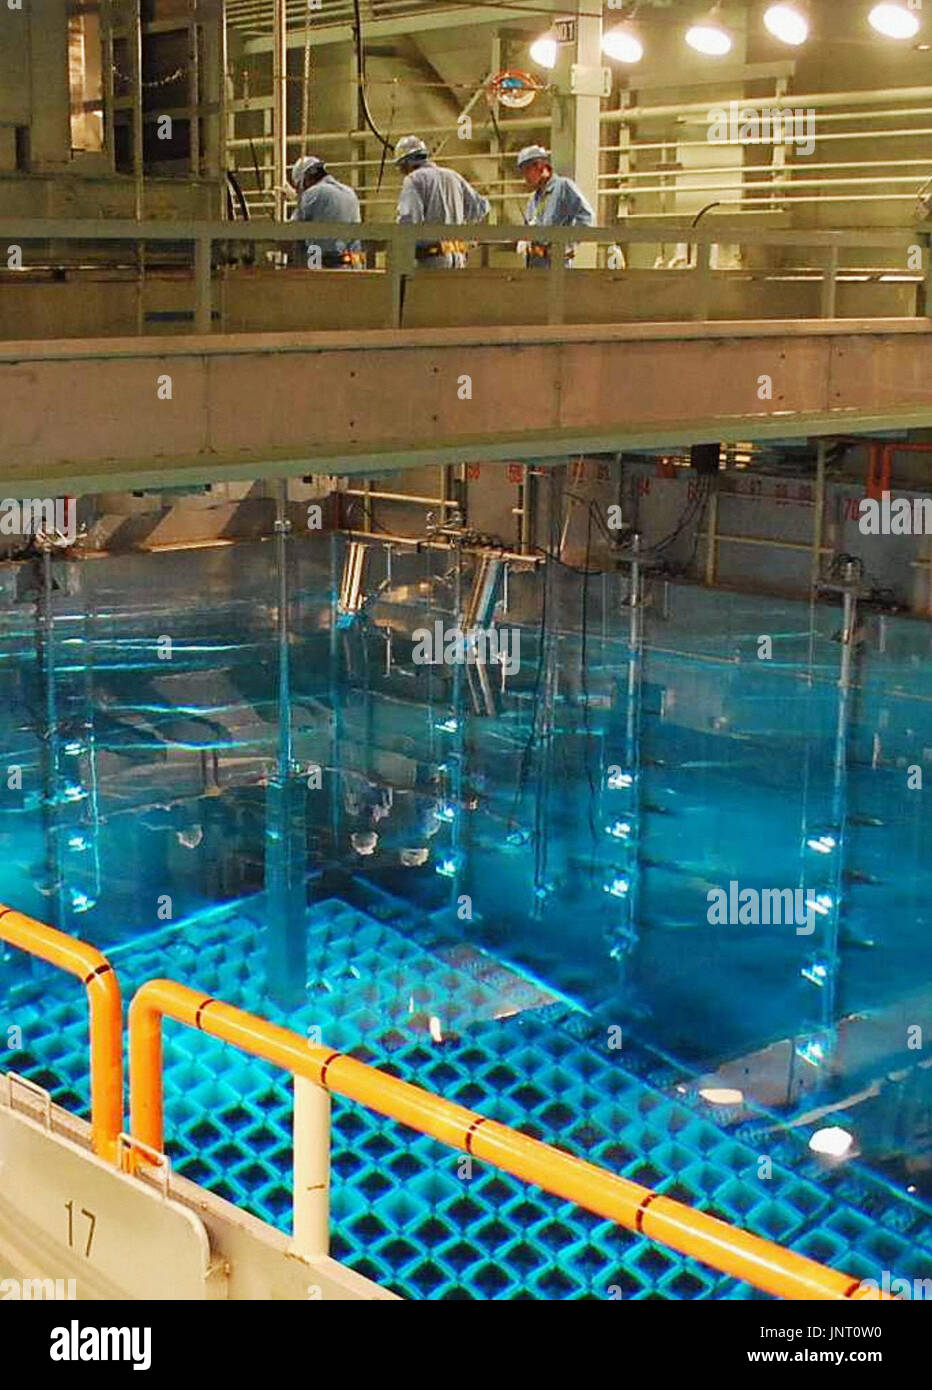 TSURUGA, Japan - Plutonium-uranium mixed oxide fuel processed in France for ''pluthermal'' power generation is placed in a storage pool filled with boric acid solution at Takahama nuclear power plant in Takahama, Fukui Prefecture, on July 6, 2010. Kansai Electric Power Co. gave the media access to observe the process. (Kyodo) Stock Photo